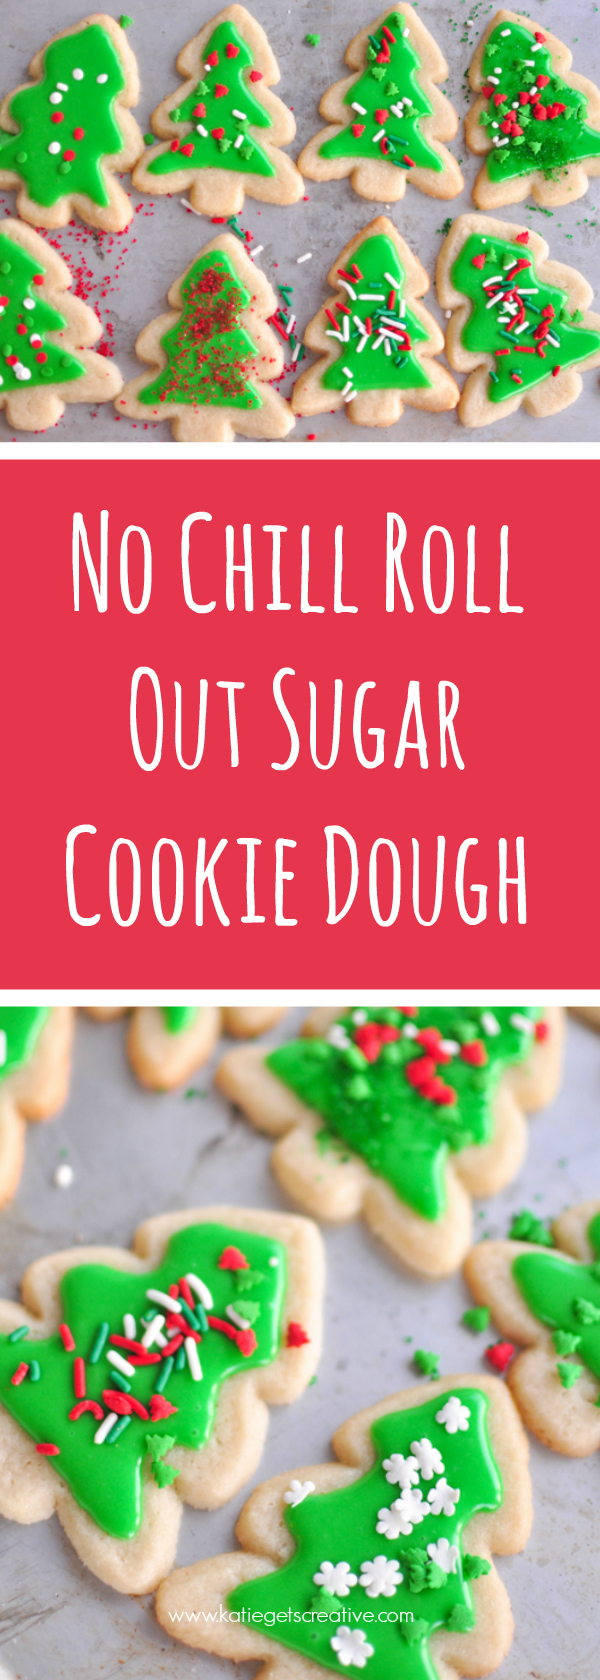 No Chill Roll Out Sugar Cookie Dough. Super easy to make and decorate with your kiddos! Recipe from www.katiegetscreative.com